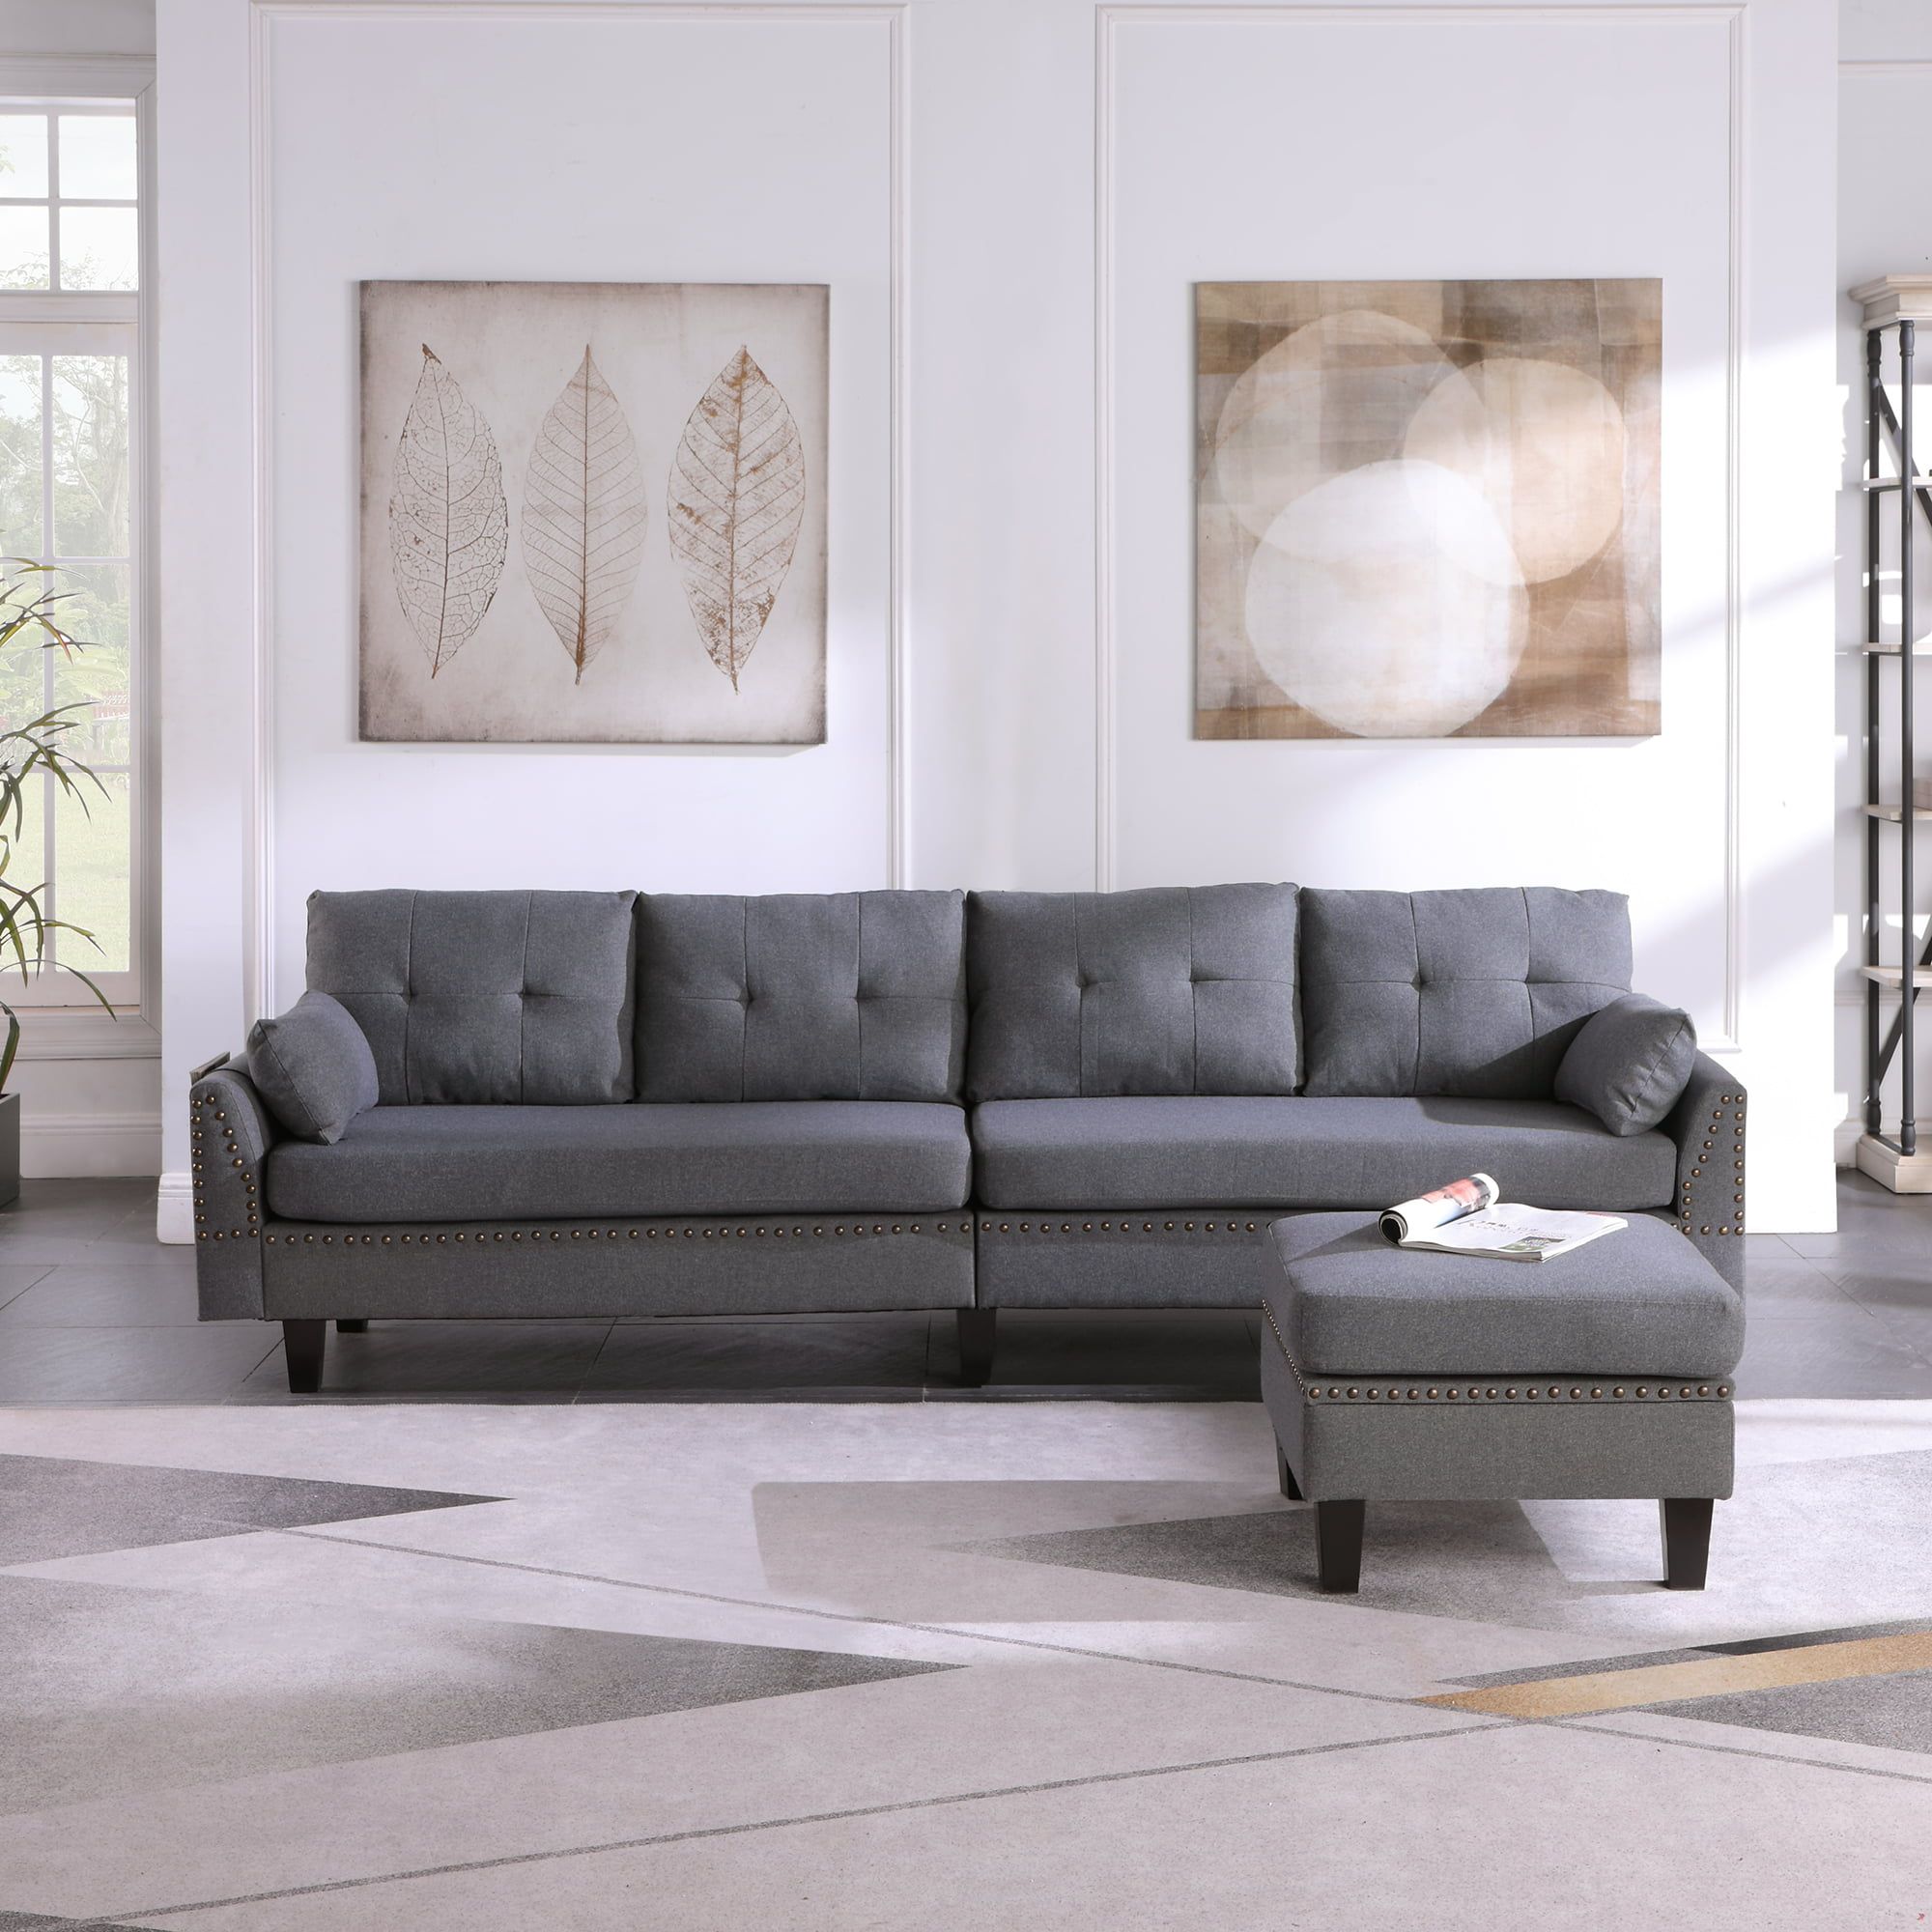 Urhomepro Mid Century Couches And Sofas With Ottoman, 2 Pillows, Modern Within Sofas With Ottomans (Gallery 19 of 20)